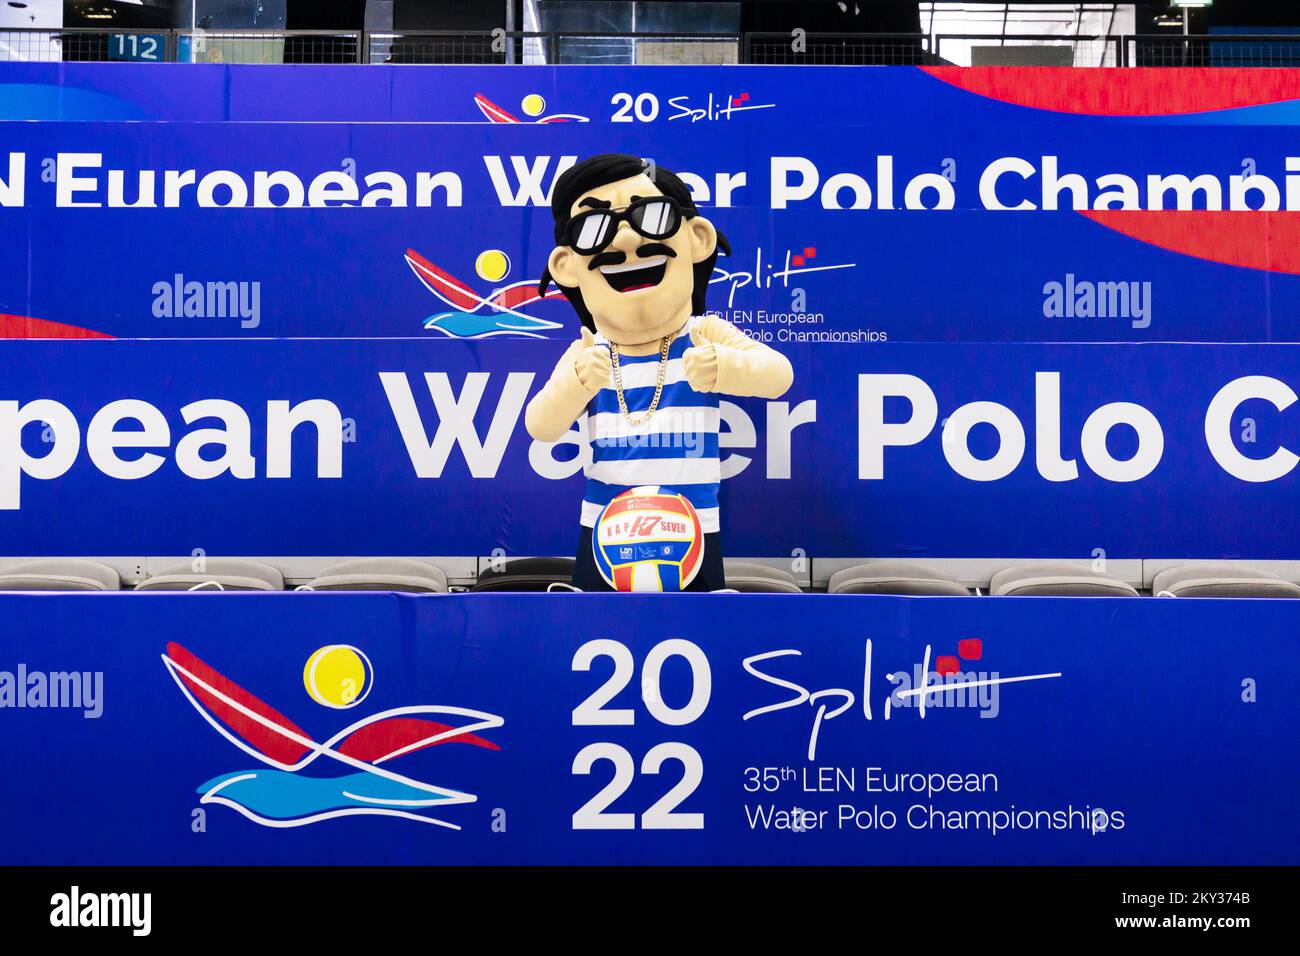 Mascot Roko of the 35th LEN European Water Polo Championships pose for